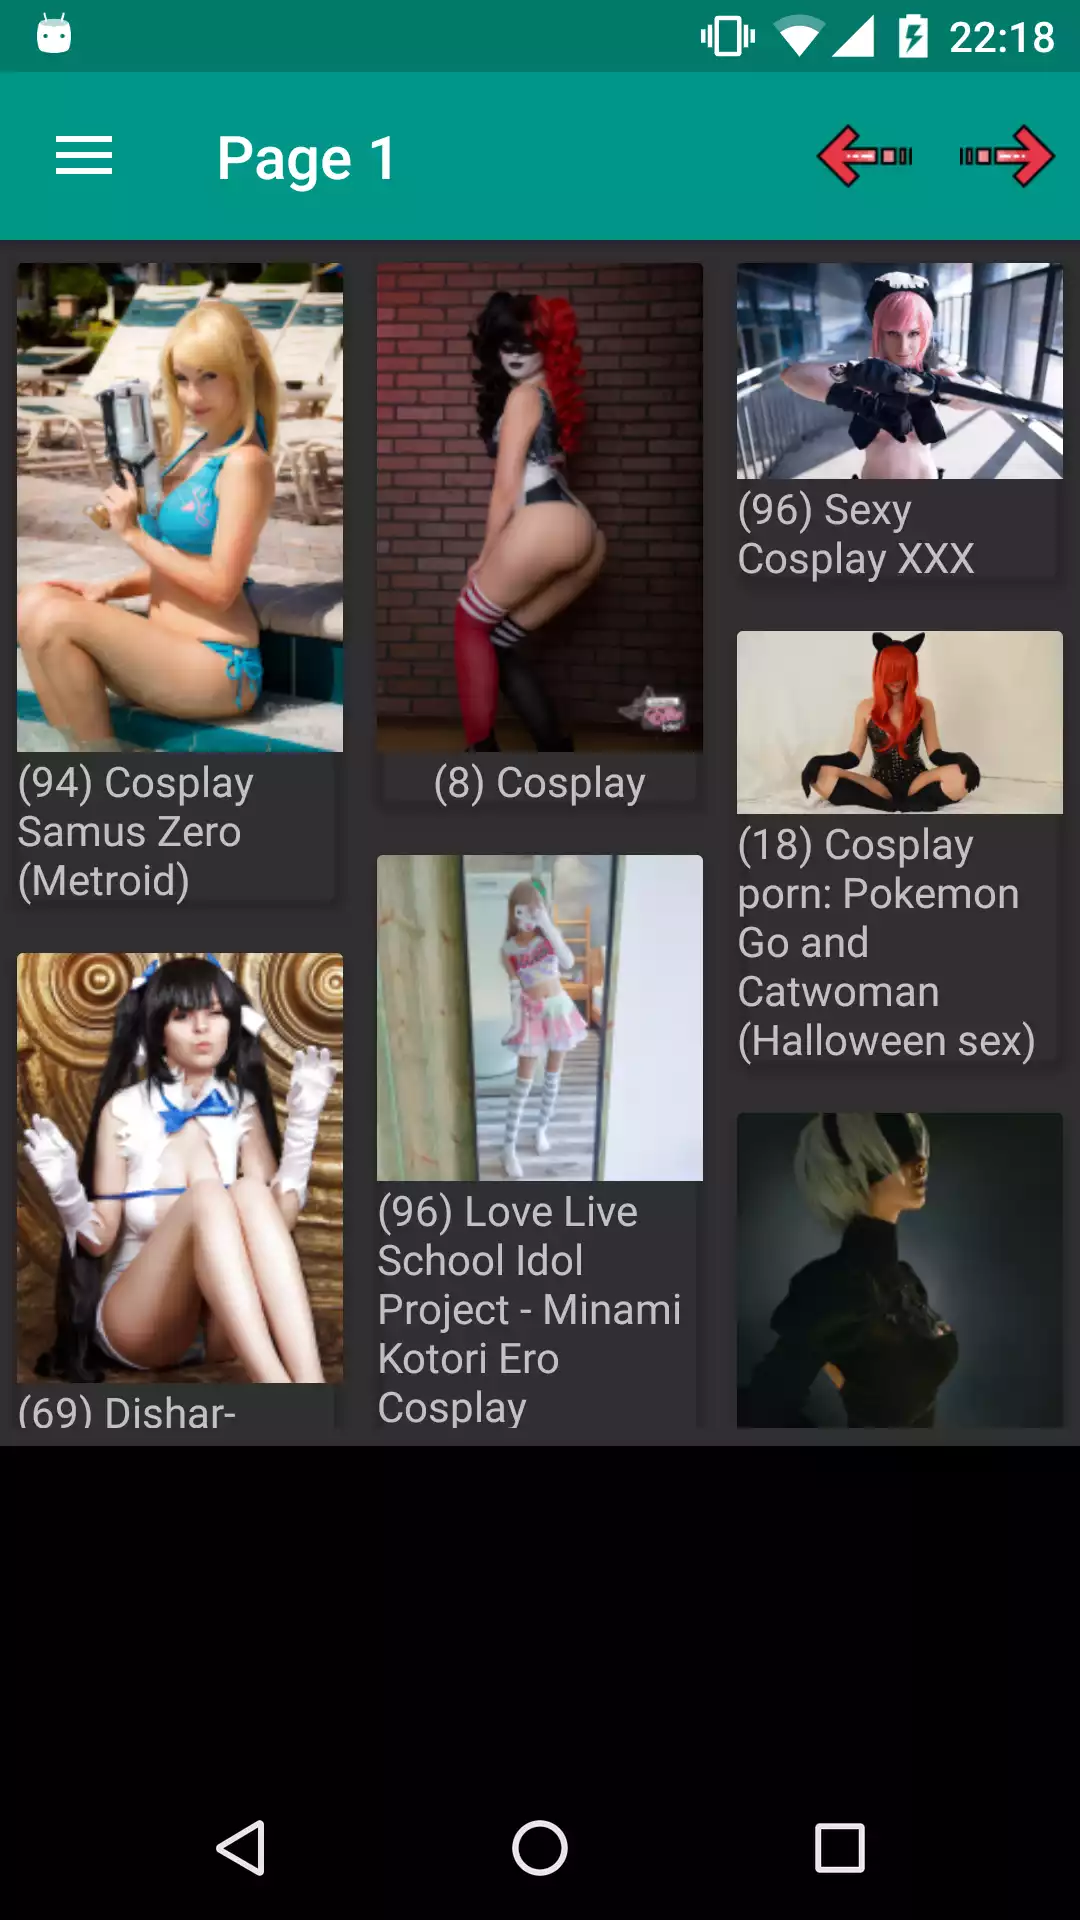 Cosplay Galleries 2 pictures,anime,futanari,collection,pornstars,hentia,hot,apk,photo,panties,amateurs,android,apps,cosplay,puzzles,sexy,henti,app,pornstar,pics,hentai,galleries,mod